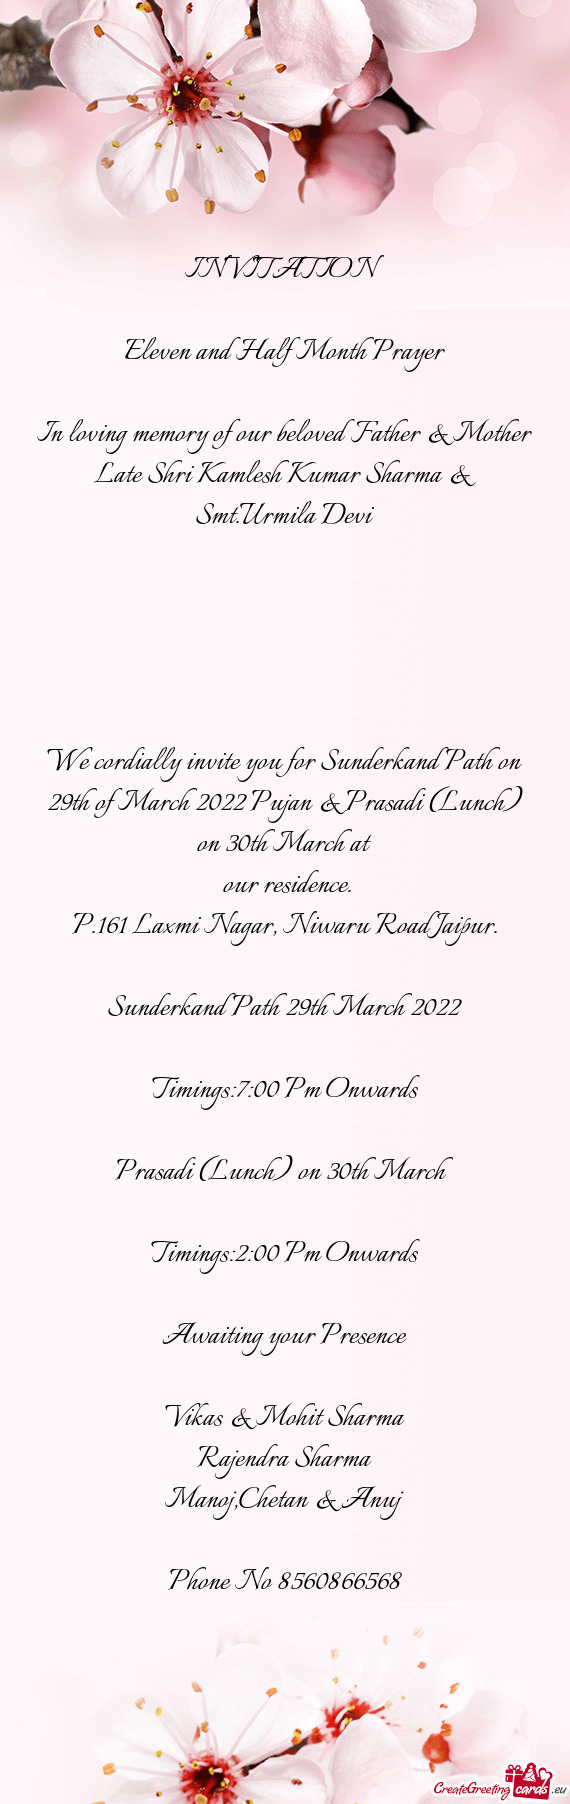 We cordially invite you for Sunderkand Path on 29th of March 2022 Pujan & Prasadi (Lunch) on 30th Ma